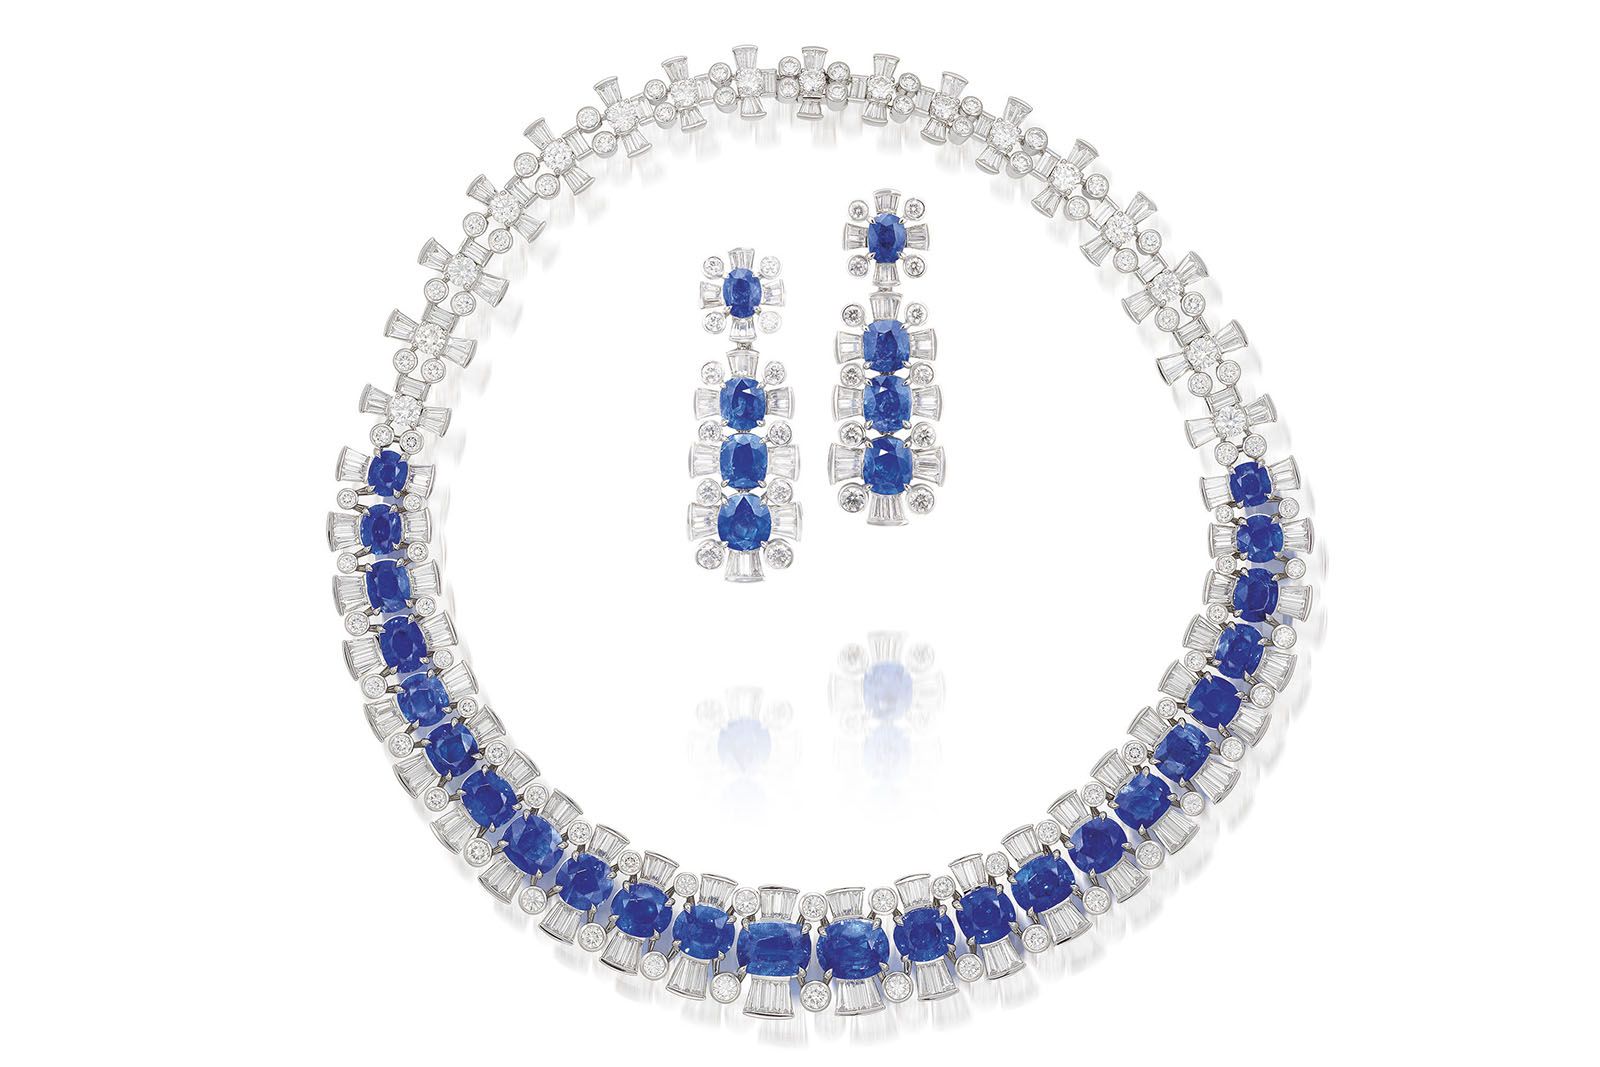 Phillips Hong Kong will present this Burmese sapphire and diamond suite at its upcoming “Sensational Jewels from a Prominent Middle Eastern Collection” auction